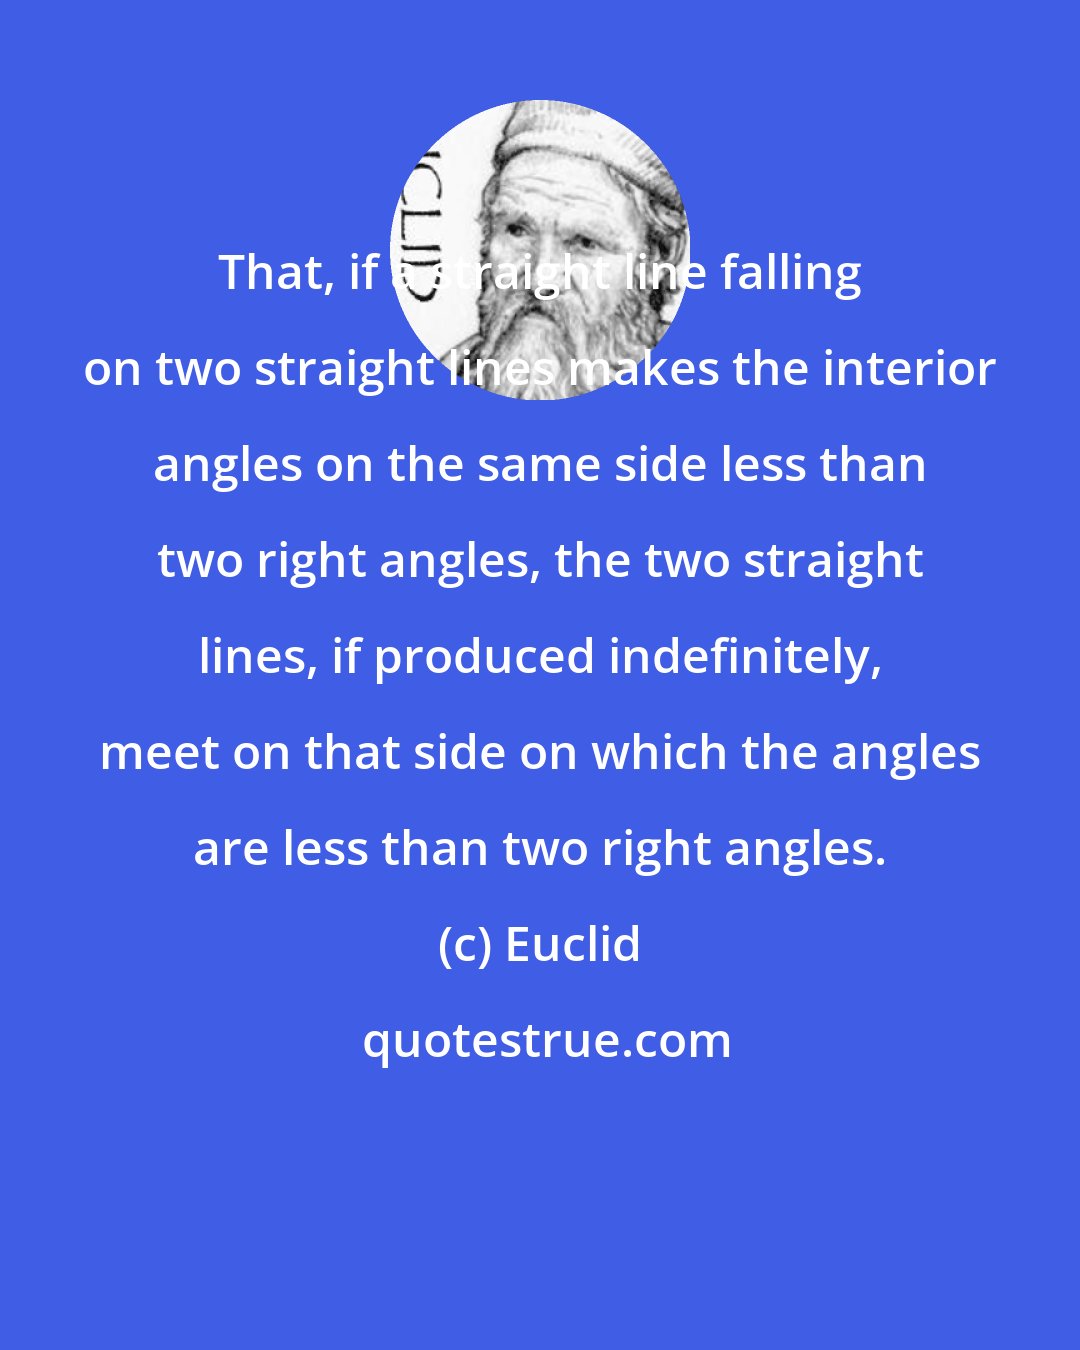 Euclid: That, if a straight line falling on two straight lines makes the interior angles on the same side less than two right angles, the two straight lines, if produced indefinitely, meet on that side on which the angles are less than two right angles.